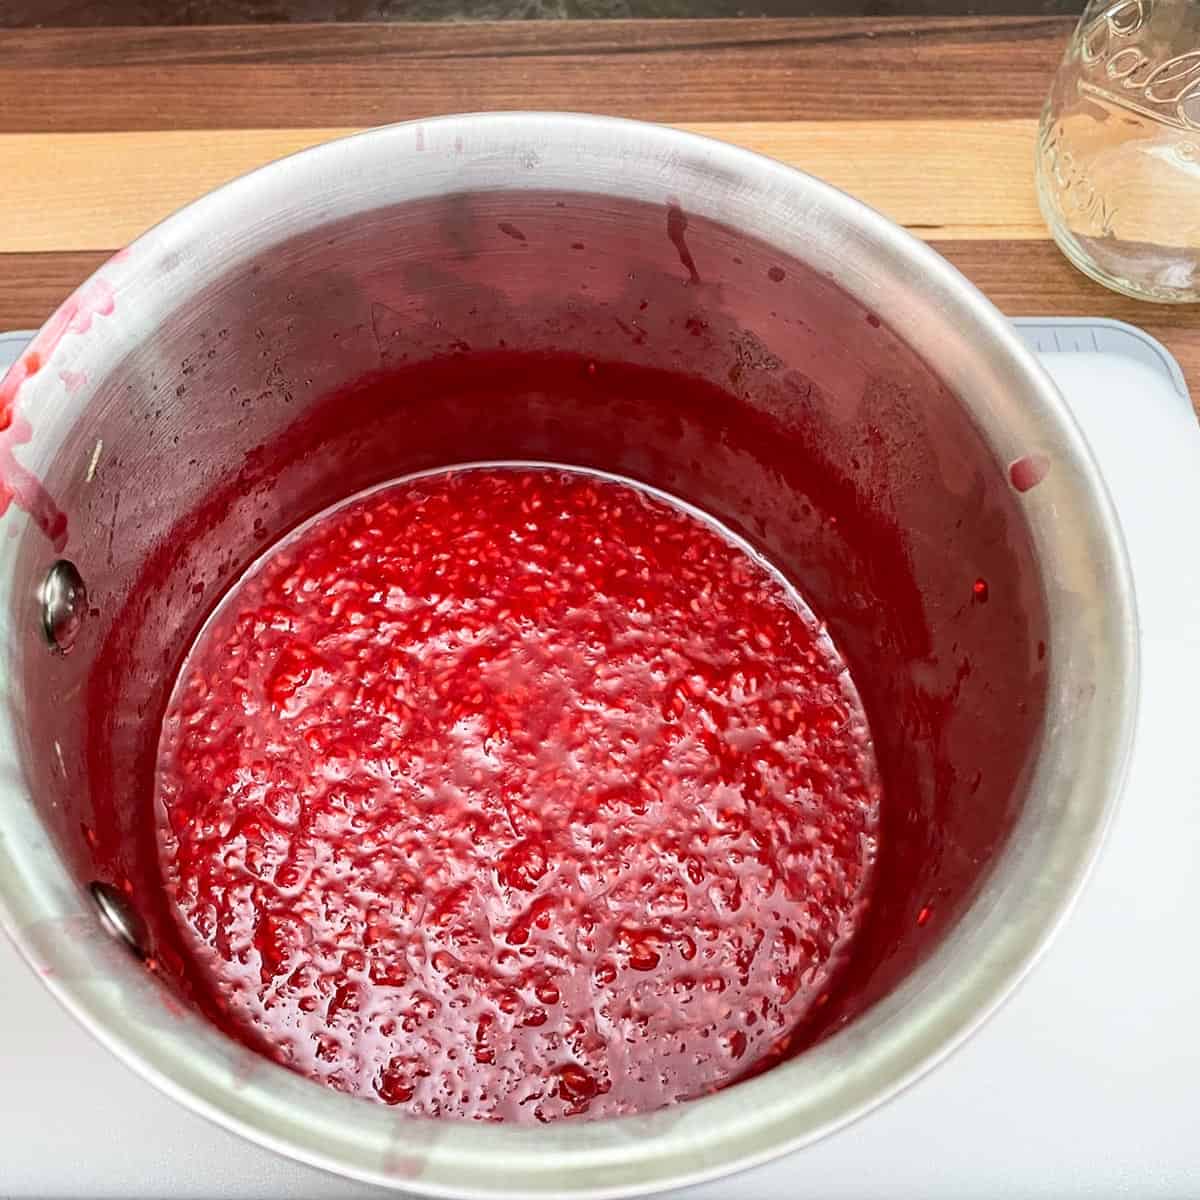 Raspberry jam that has been thickened and reduced by half.